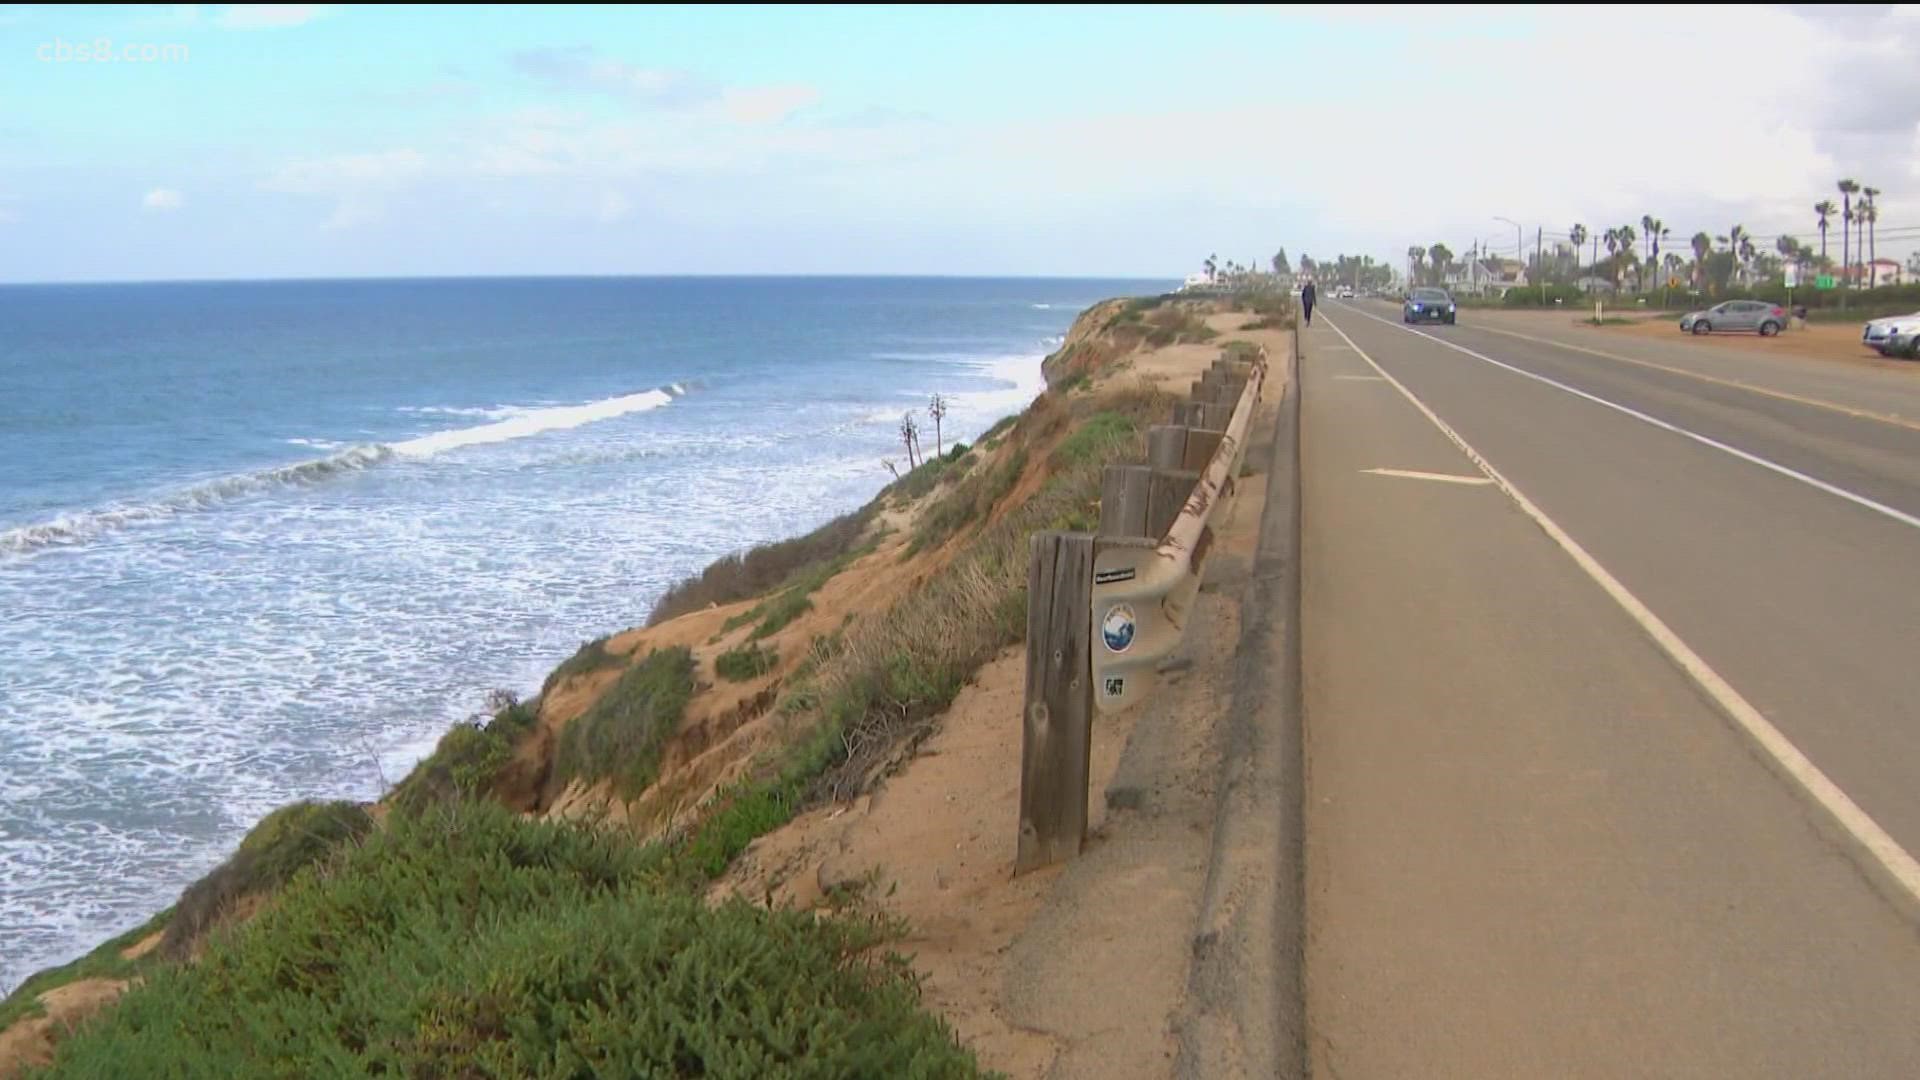 City planners met Tuesday night to discuss the South Carlsbad Coastline Project which aims to transform 60 acres of city-owned land along the Coast Highway.